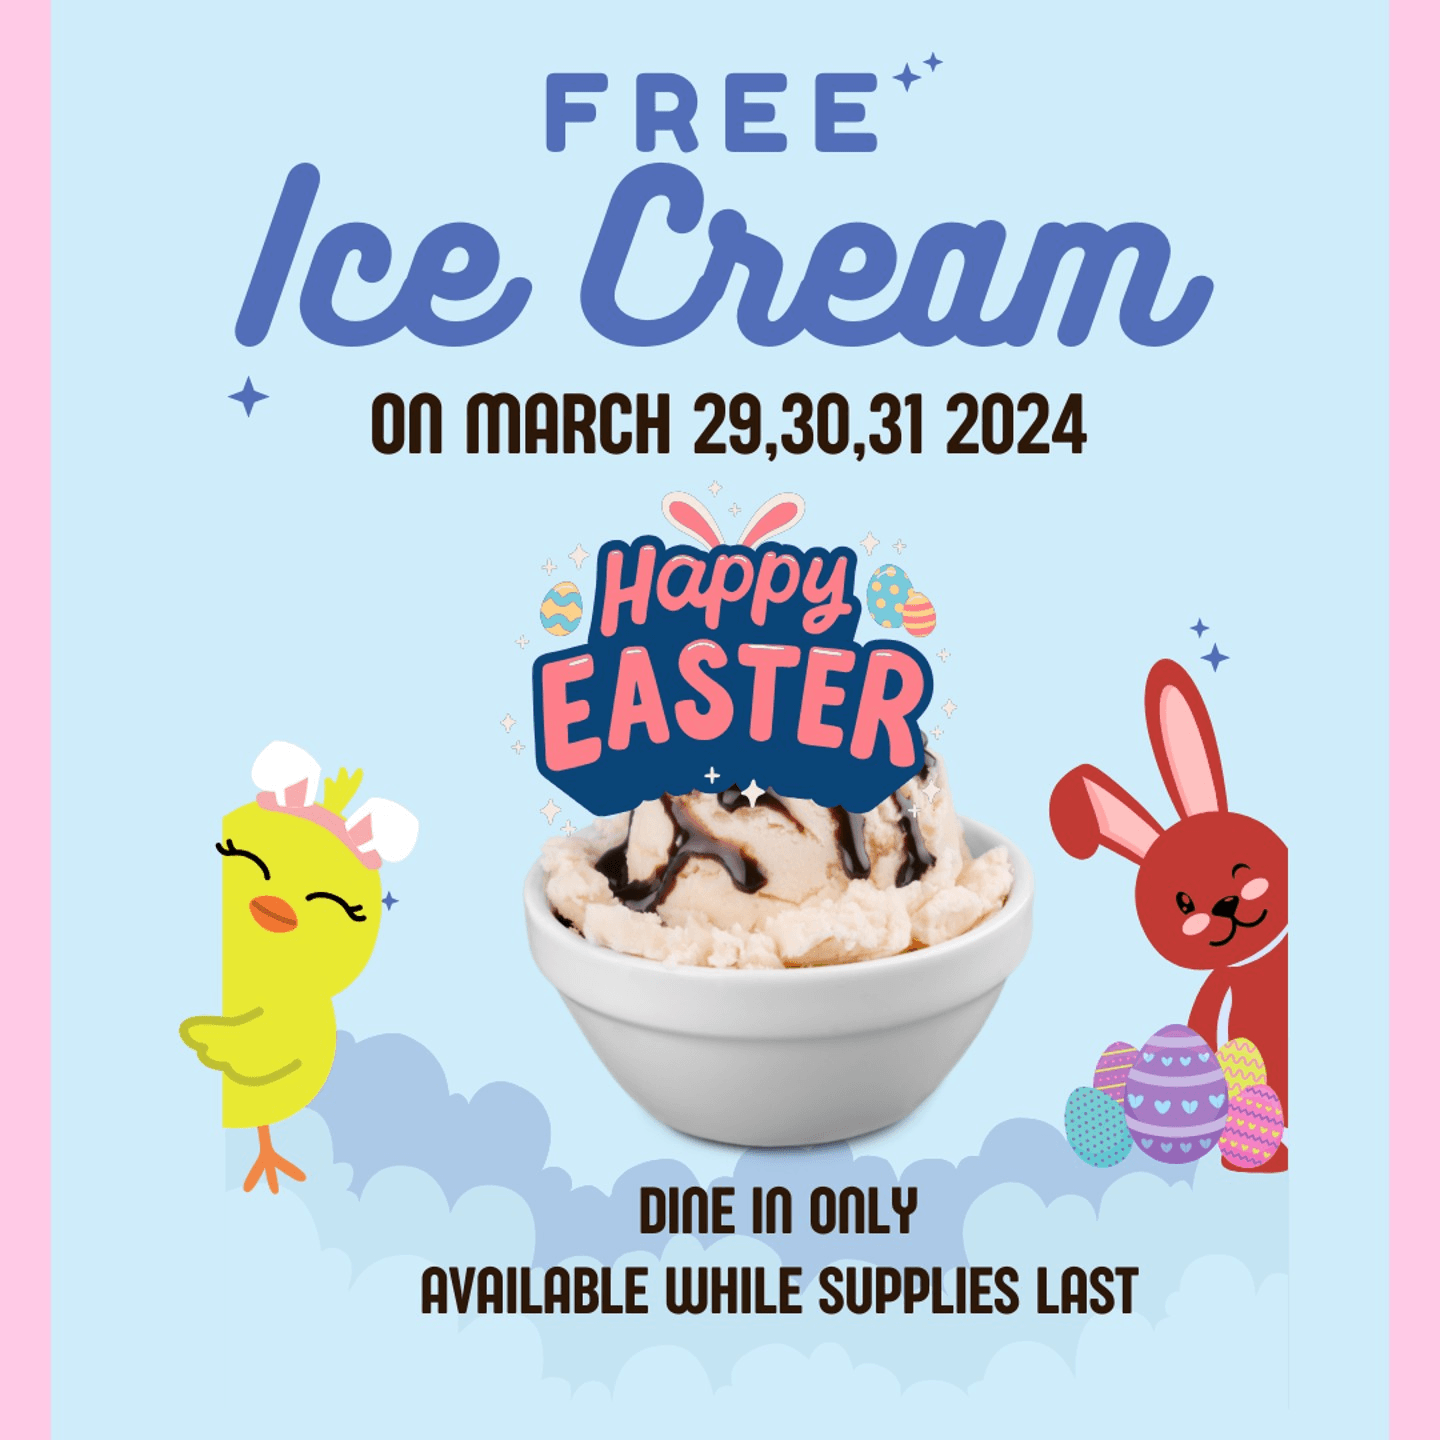  Free Ice Cream for Every Dine-In Guest!